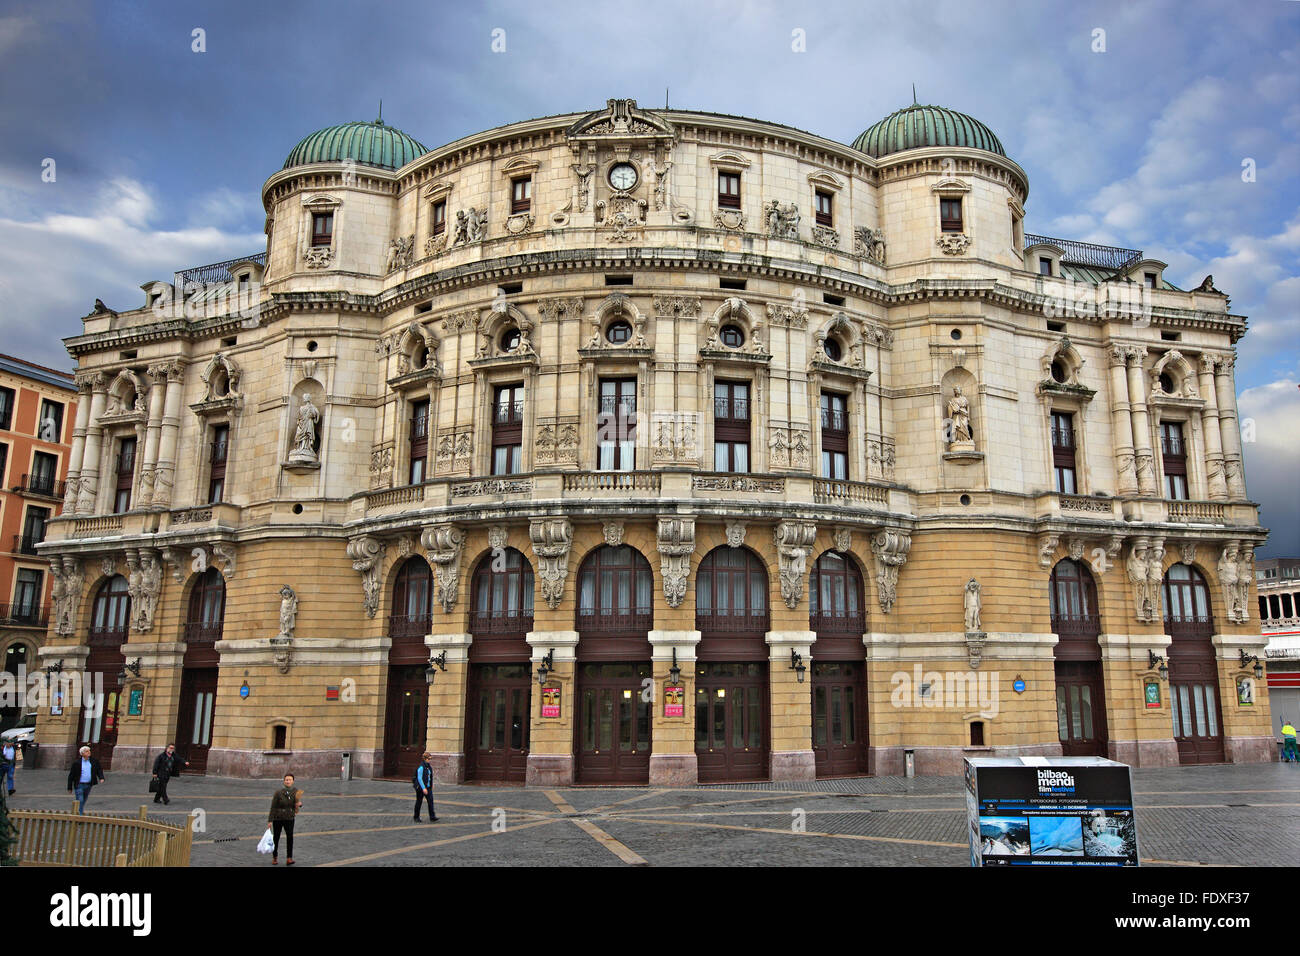 The facade of Arriaga Theater at the Casco Viejo (the Old Quarter) of Bilbao city, Basque Country, Spain. Stock Photo